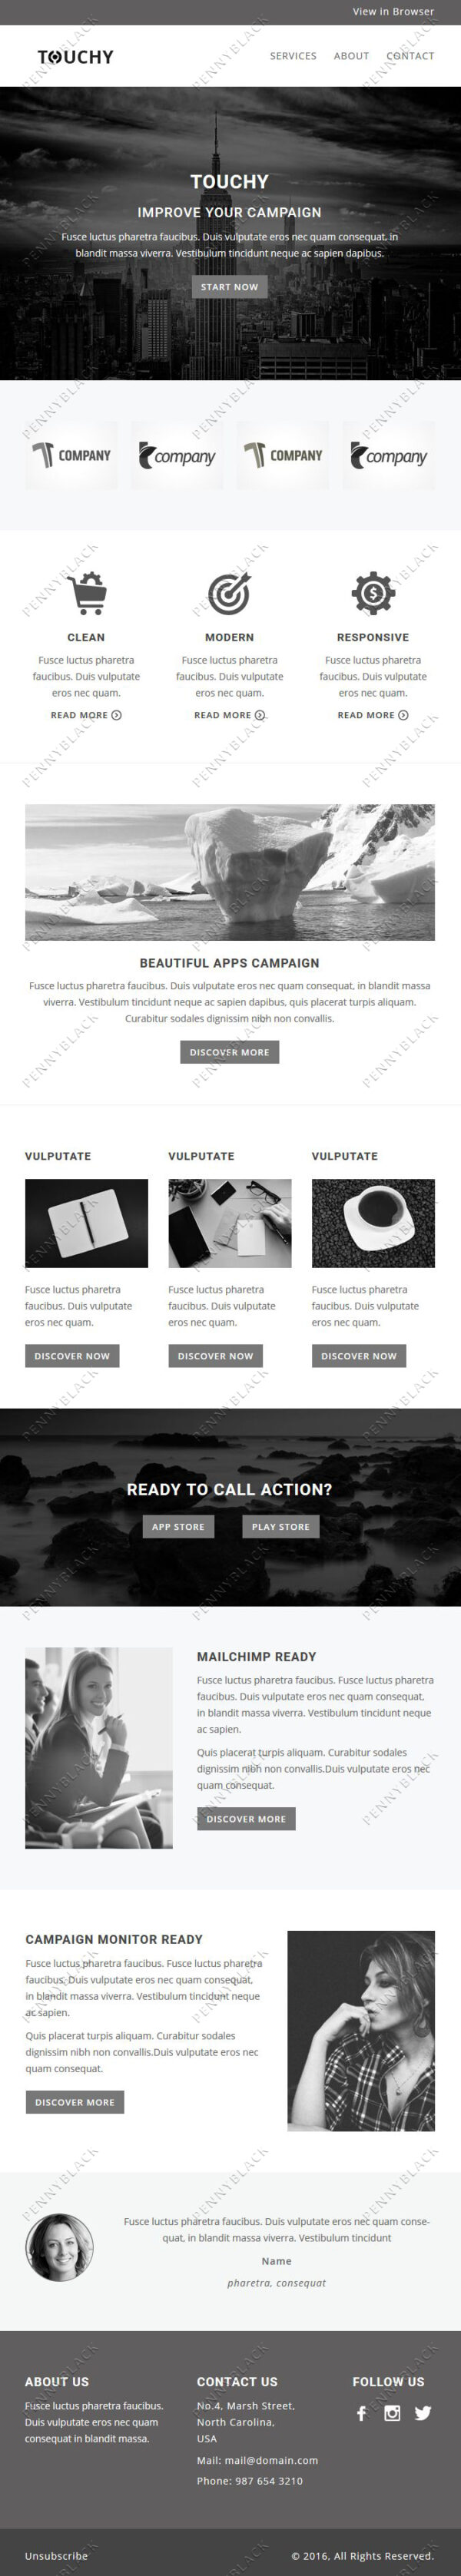 Touchy- Multipurpose Responsive Email Template